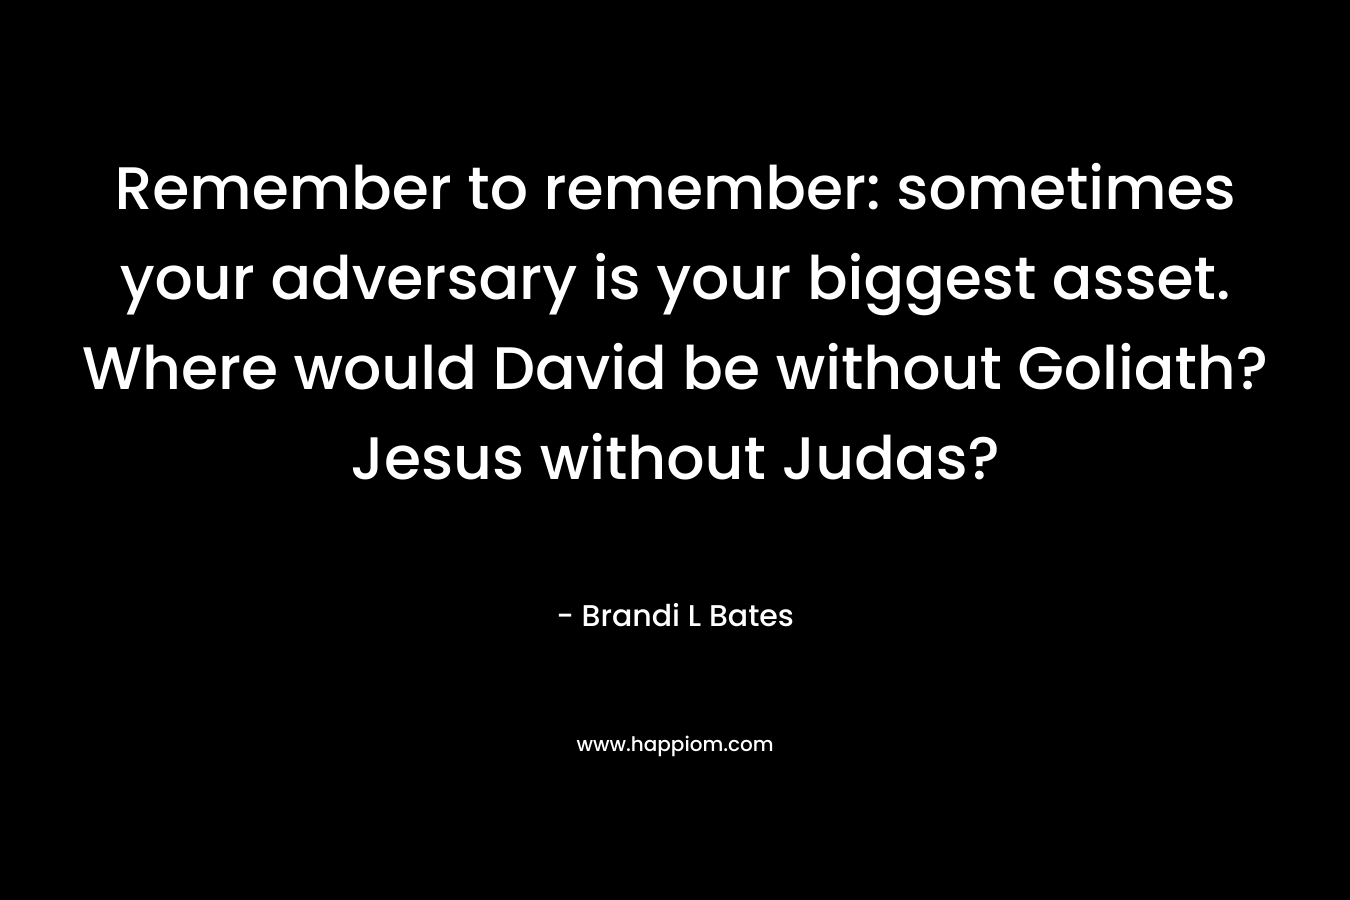 Remember to remember: sometimes your adversary is your biggest asset. Where would David be without Goliath? Jesus without Judas? – Brandi L Bates